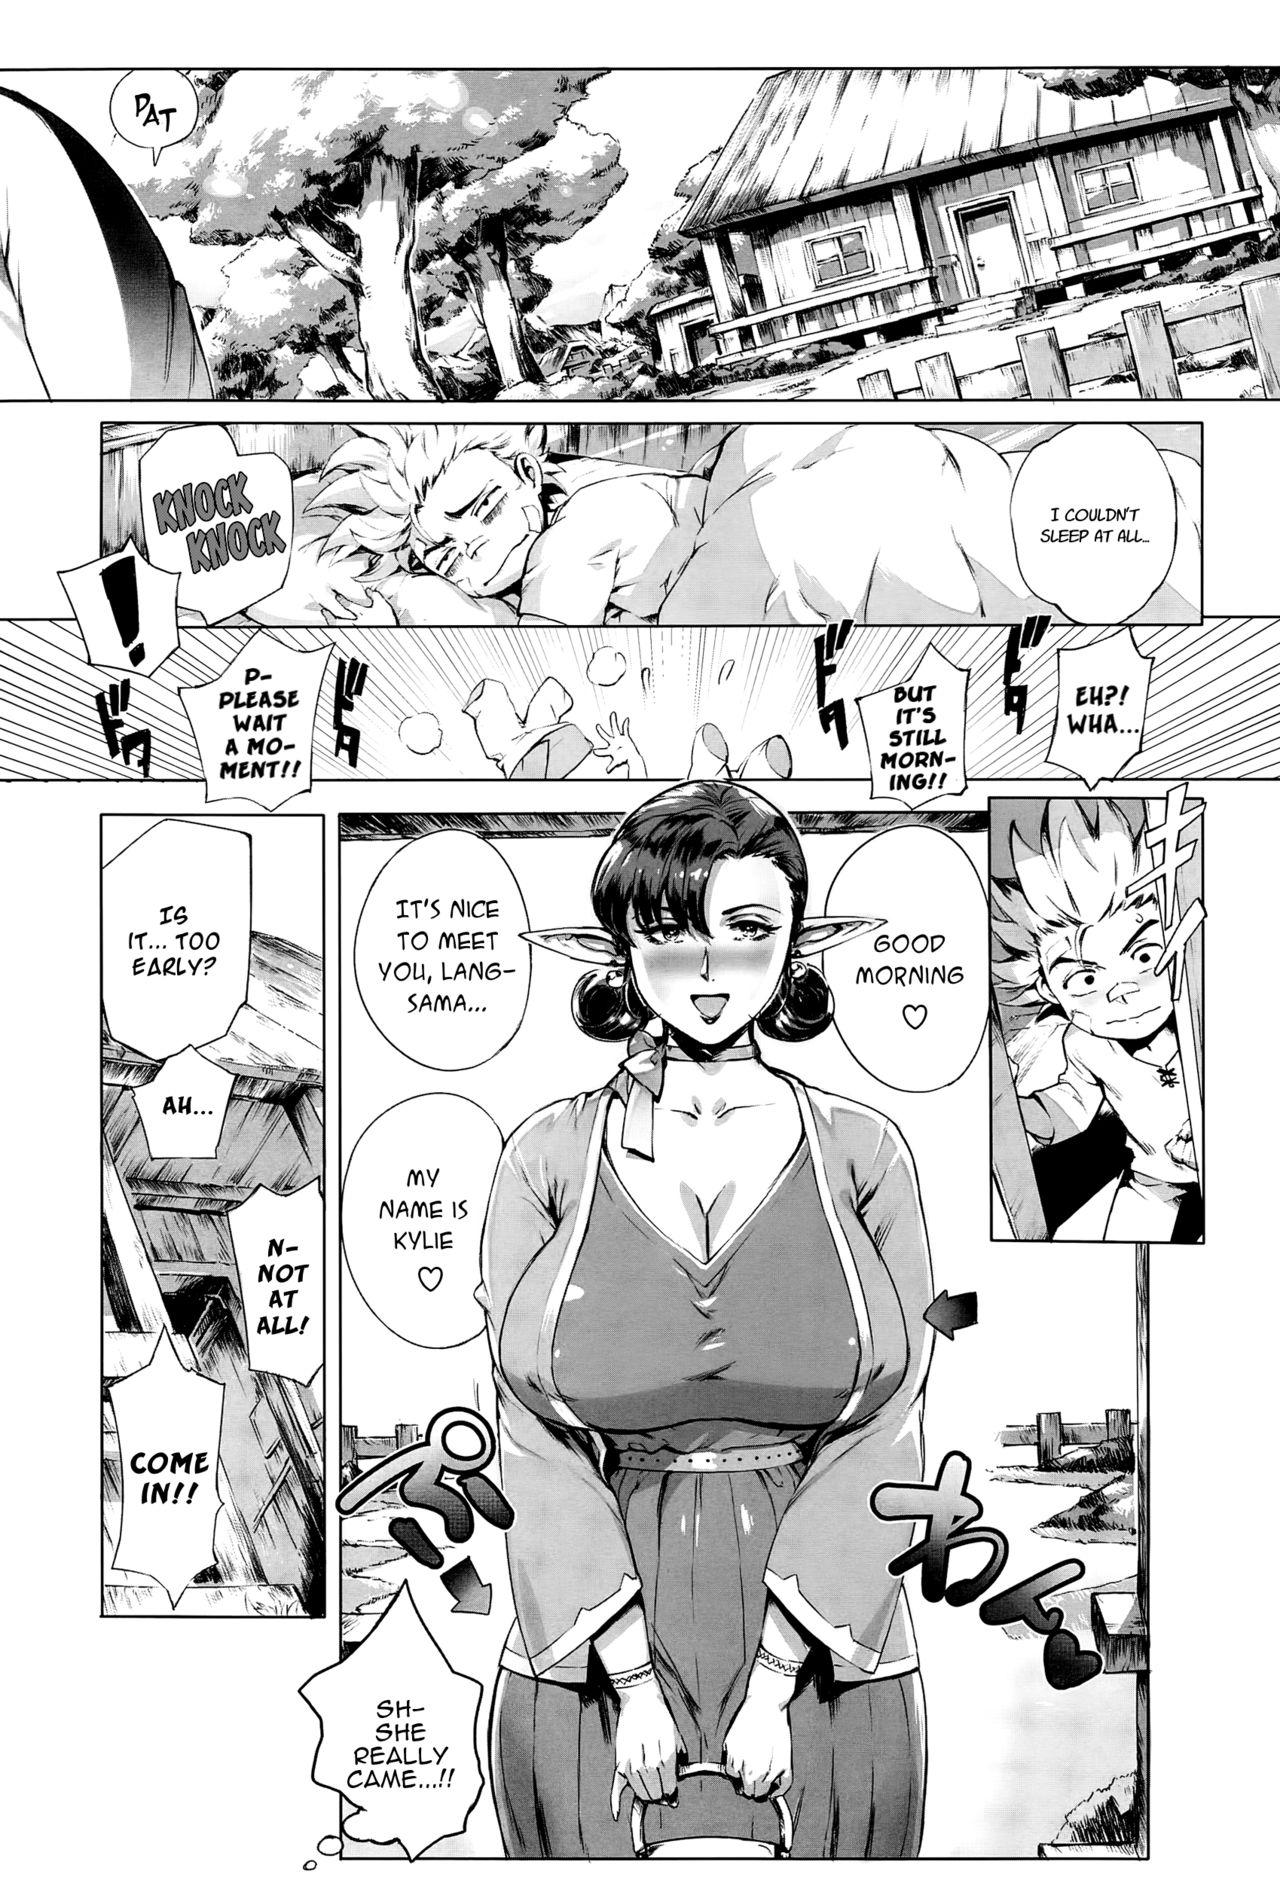 Puta Koko ga Tanetsuke Frontier | This Is The Mating Frontier! Ch. 1-2 Heels - Page 9